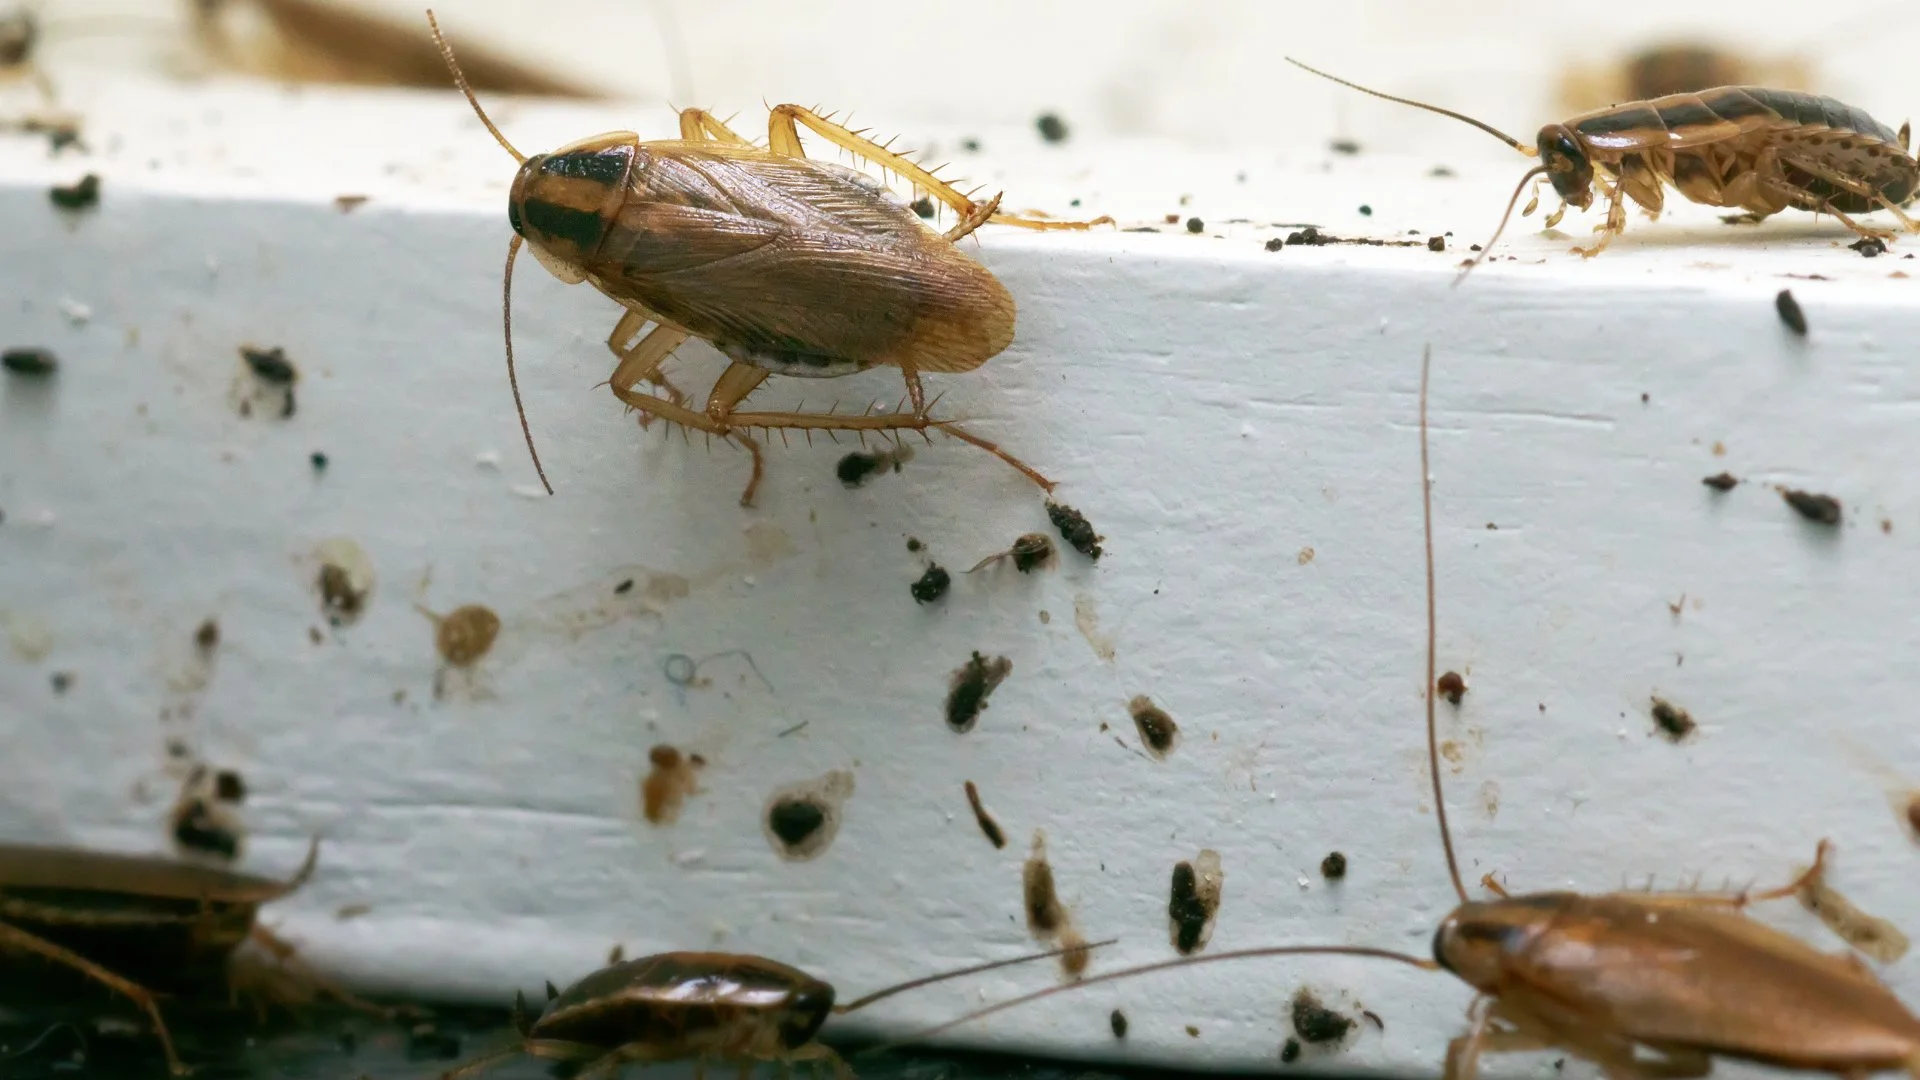 How do I Keep Pests Out of My Home?